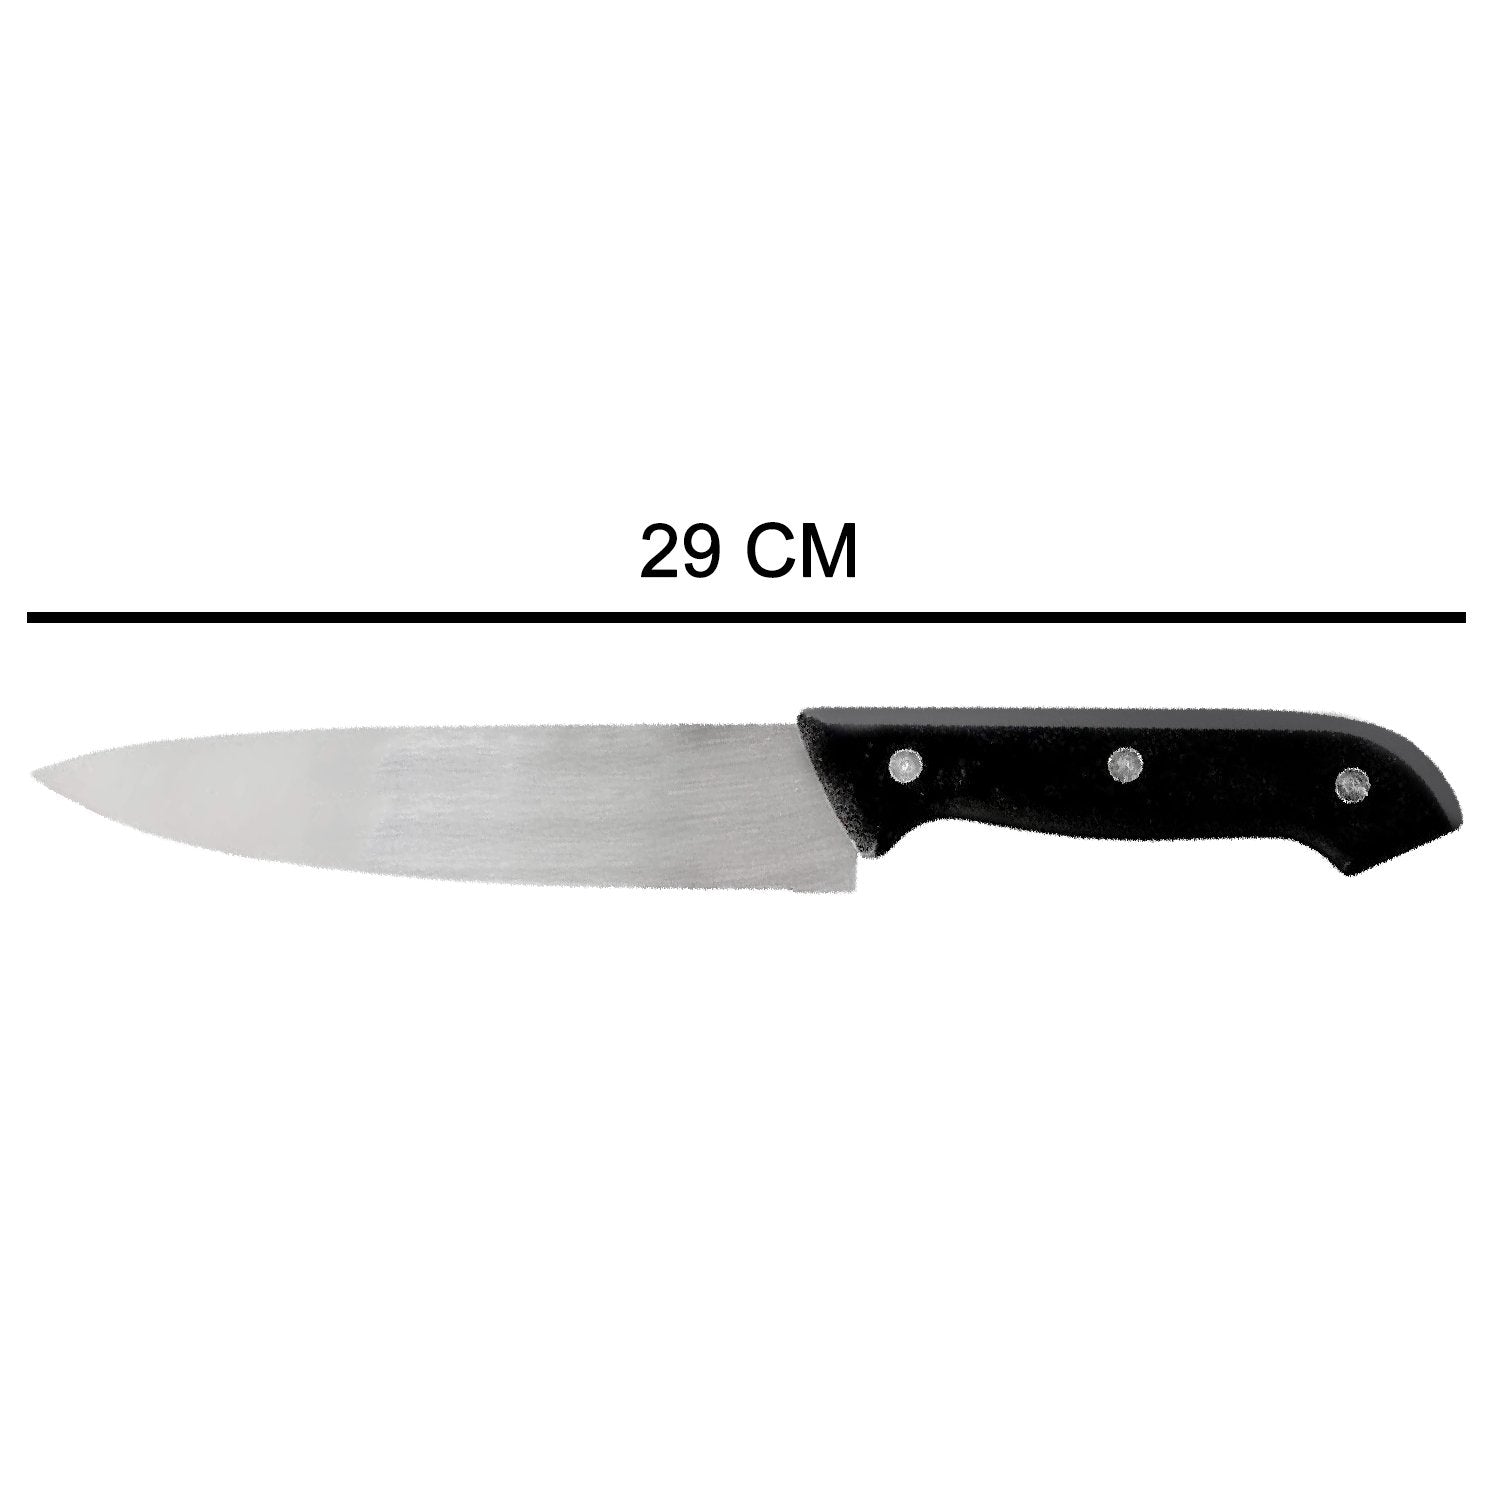 7023 Chief Knife Heavy Duty Vegetable and Non Veg Kitchen Knife (Big) - SkyShopy